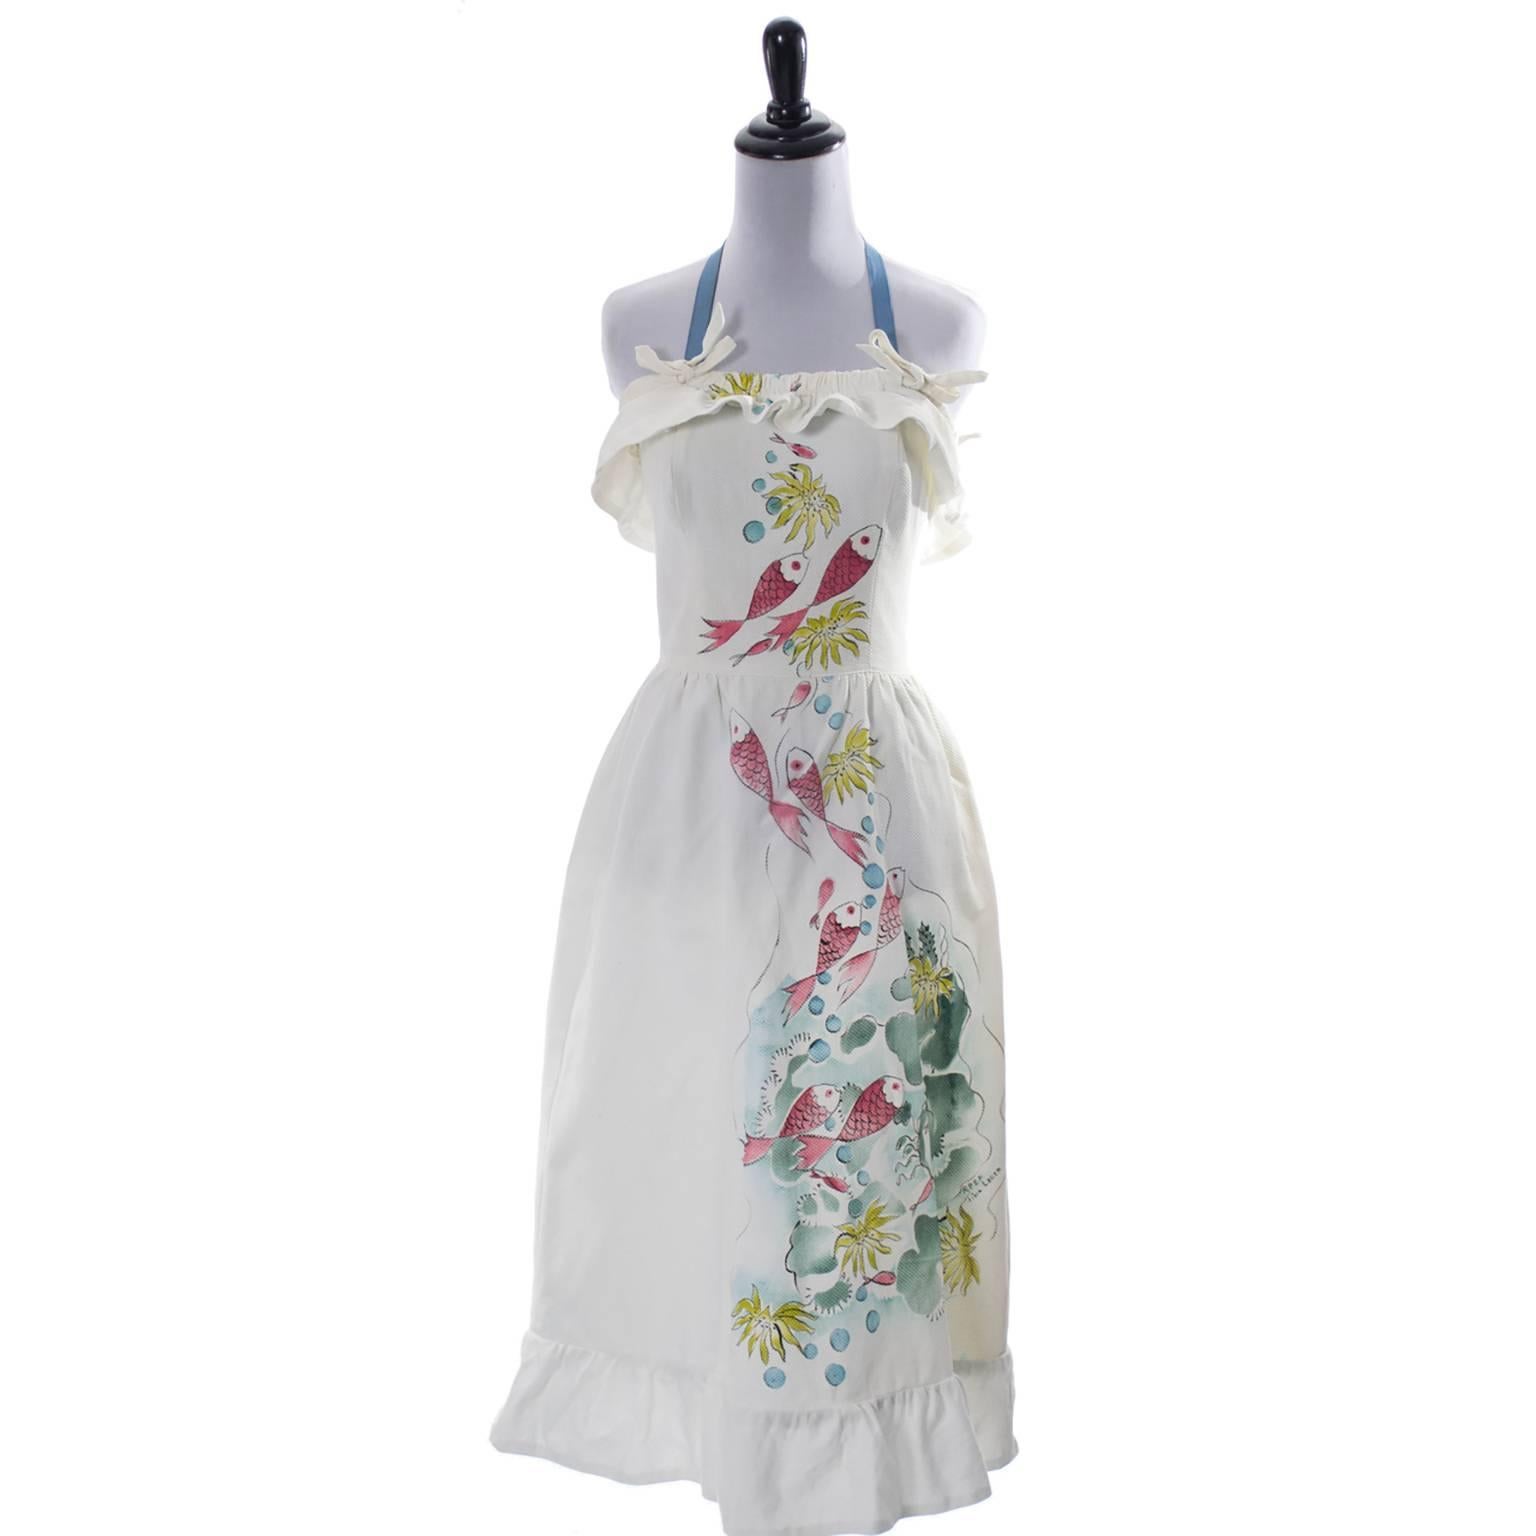 This is a very rare cotton pique 1940s vintage dress that was hand painted by designer Tina Leser.  Very rare and very hard to find, the hand painted Tina Leser garments are found in museums.   Tina Leser was inspired by the fabrics and natural